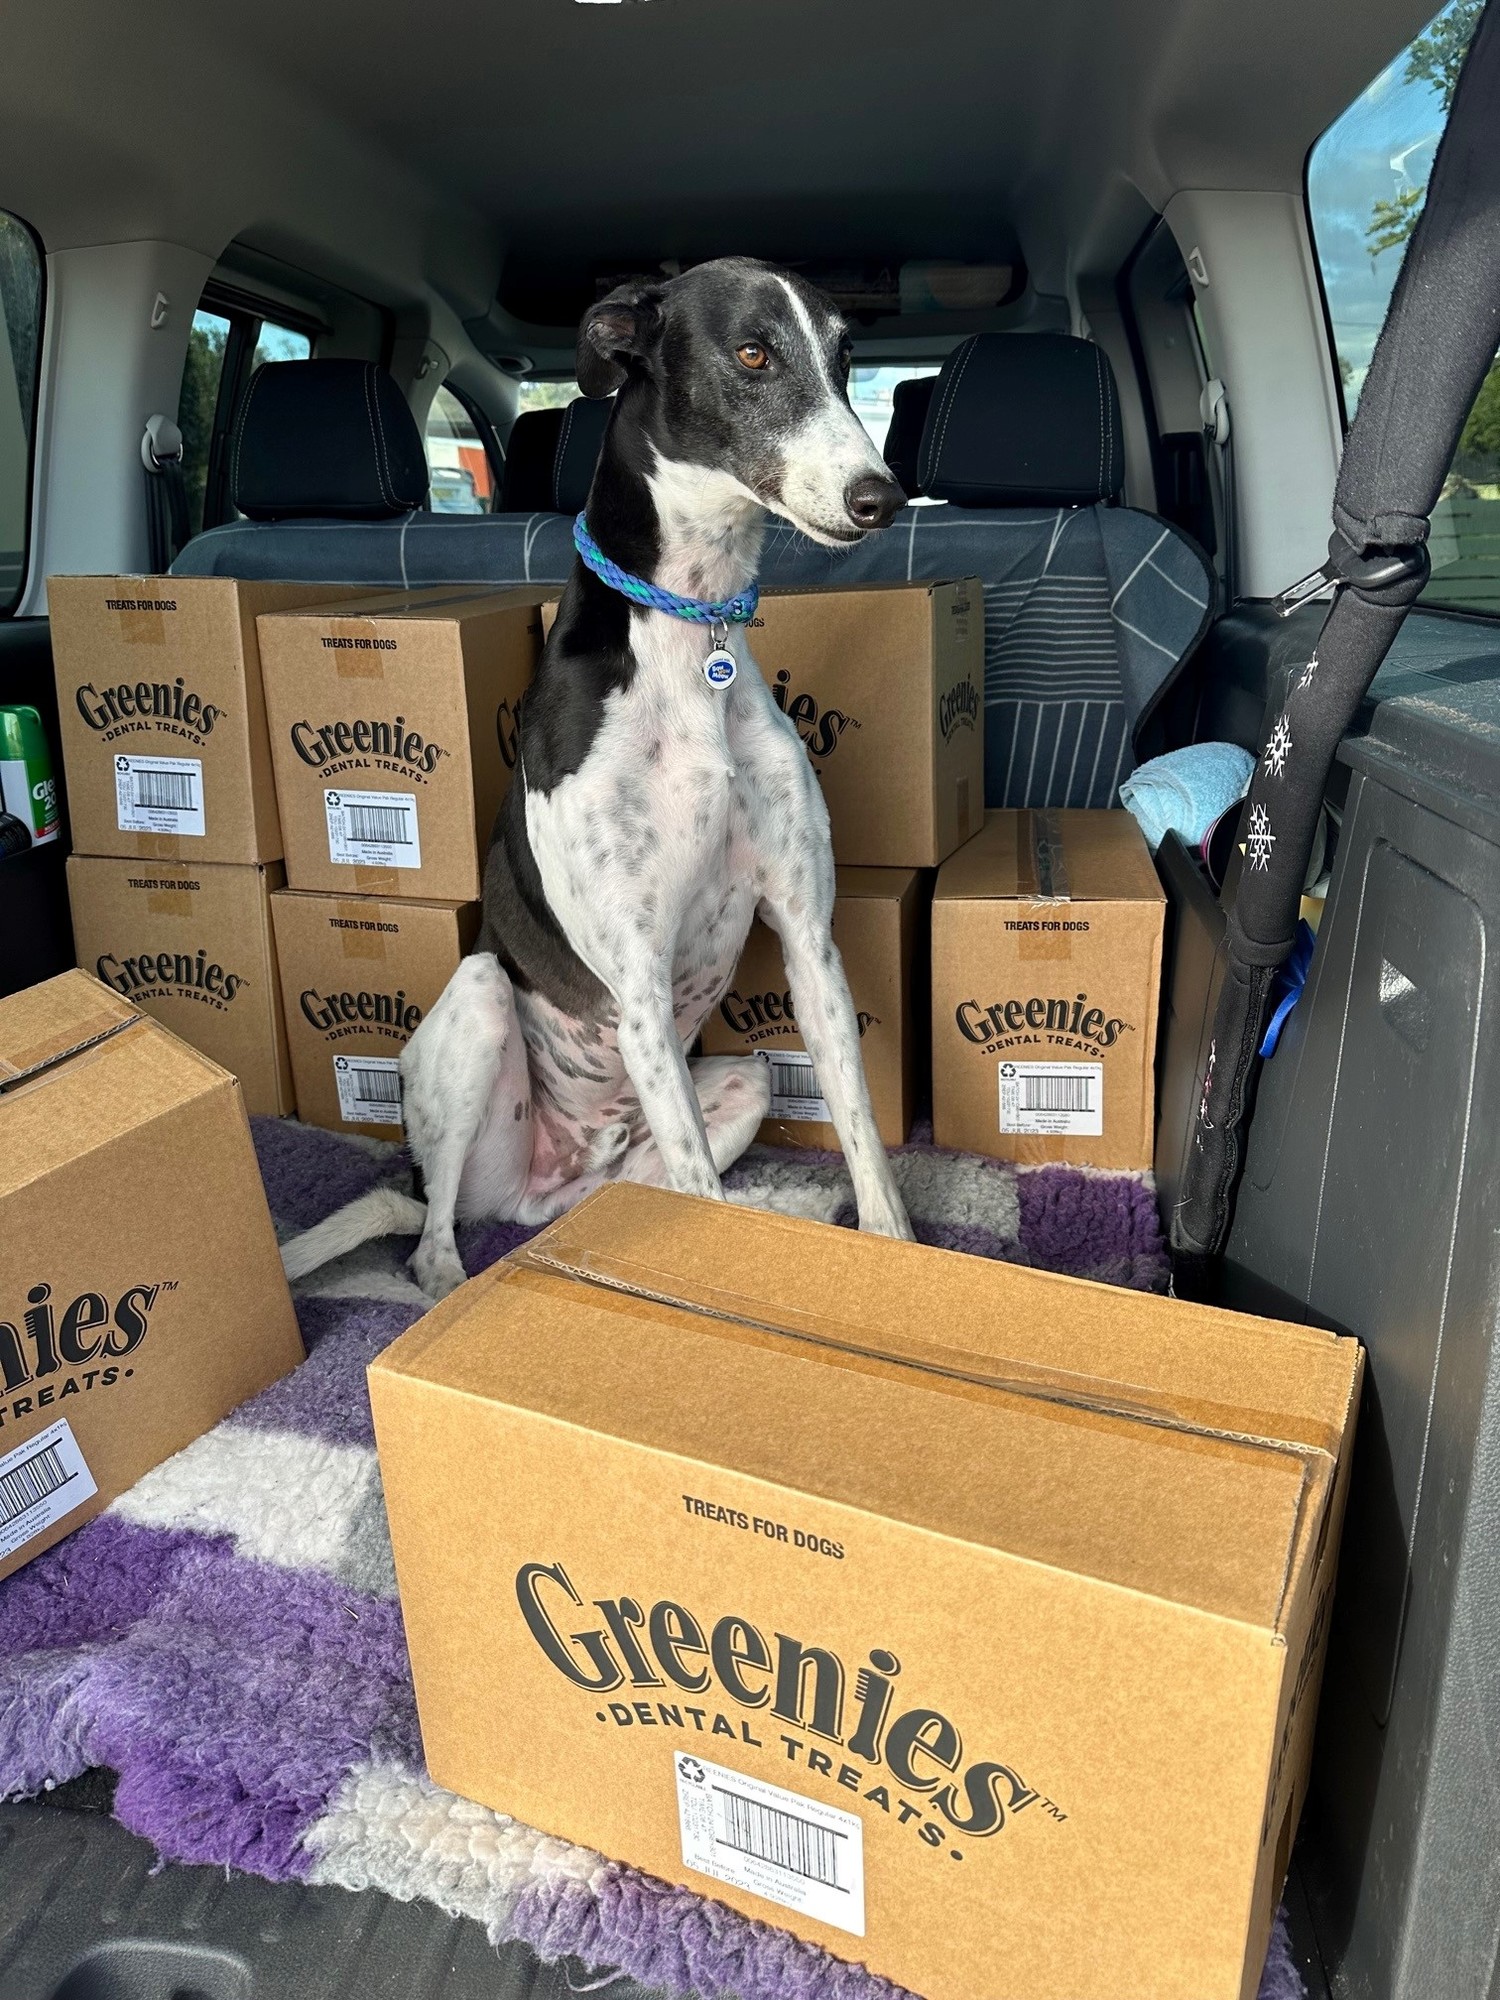 Black and white greyhound in car with Greenies boxes